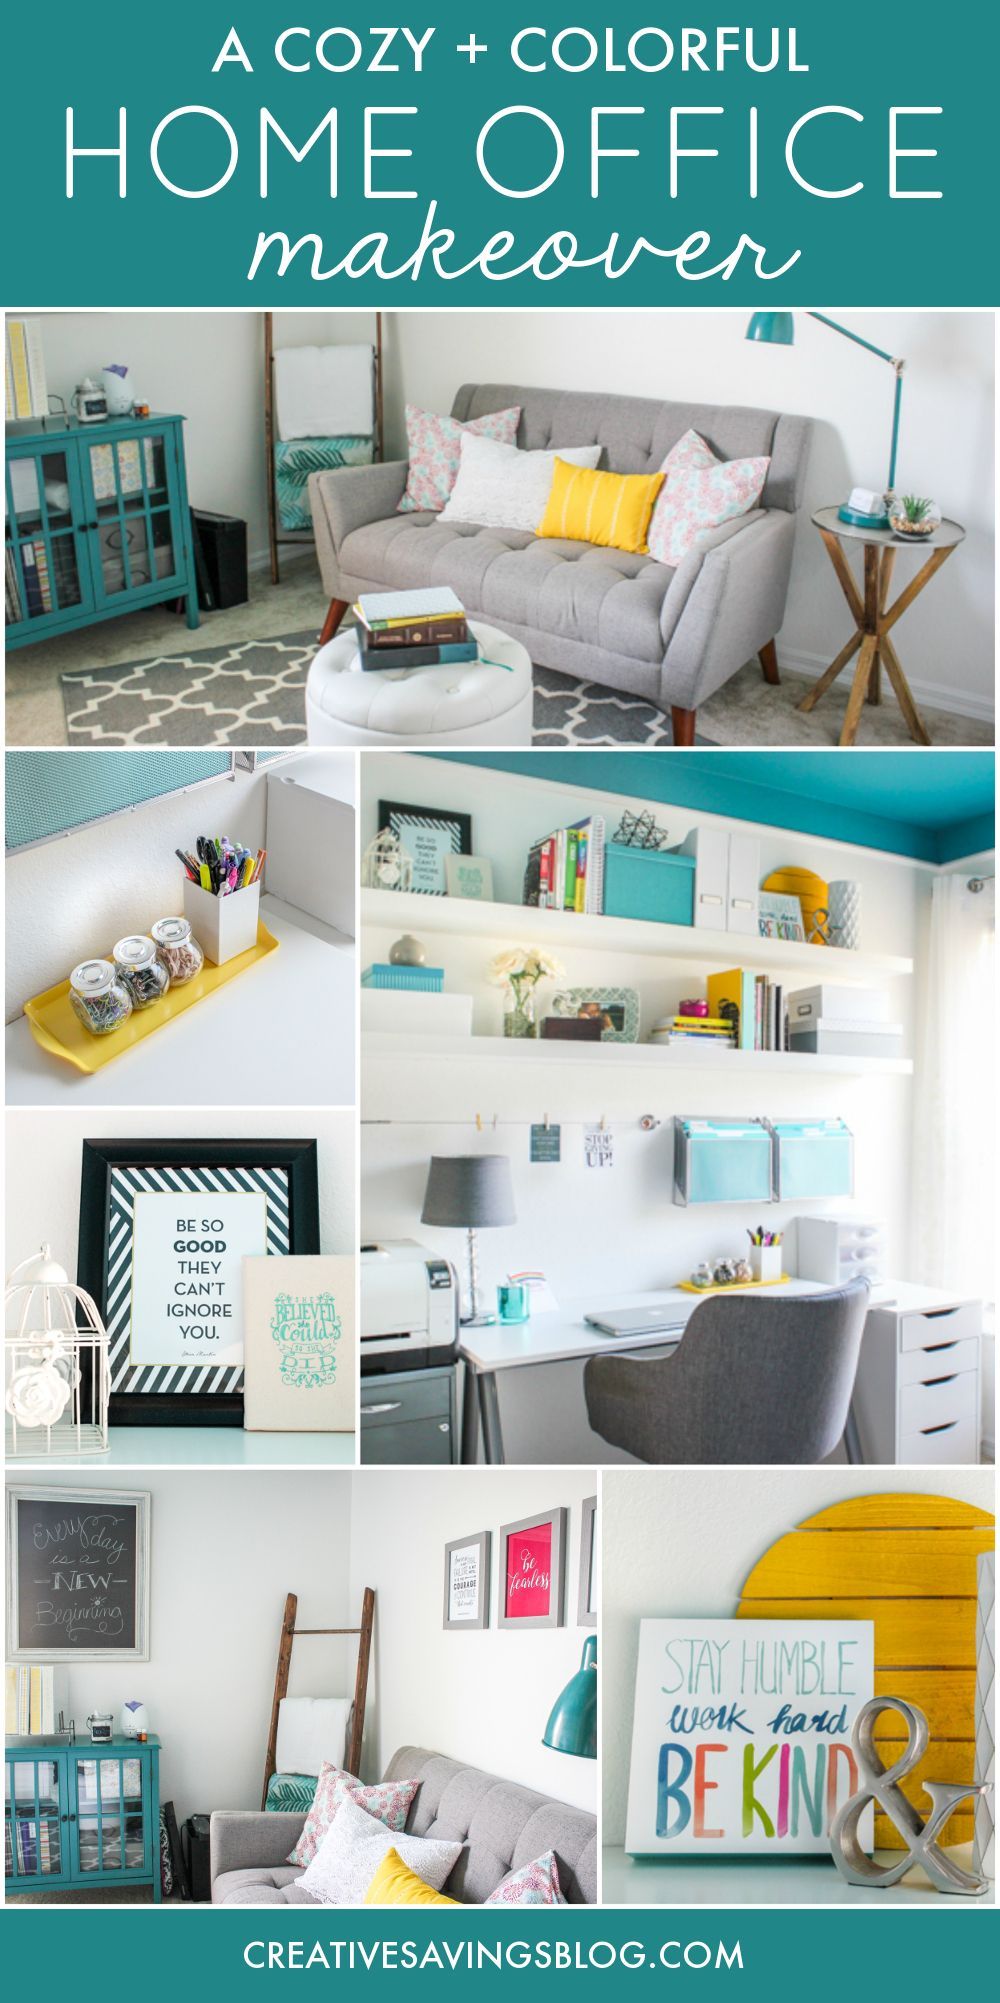 Need home office ideas? This cozy and colorful space fuels creativity with a functional yet stylish design. You won’t mind getting